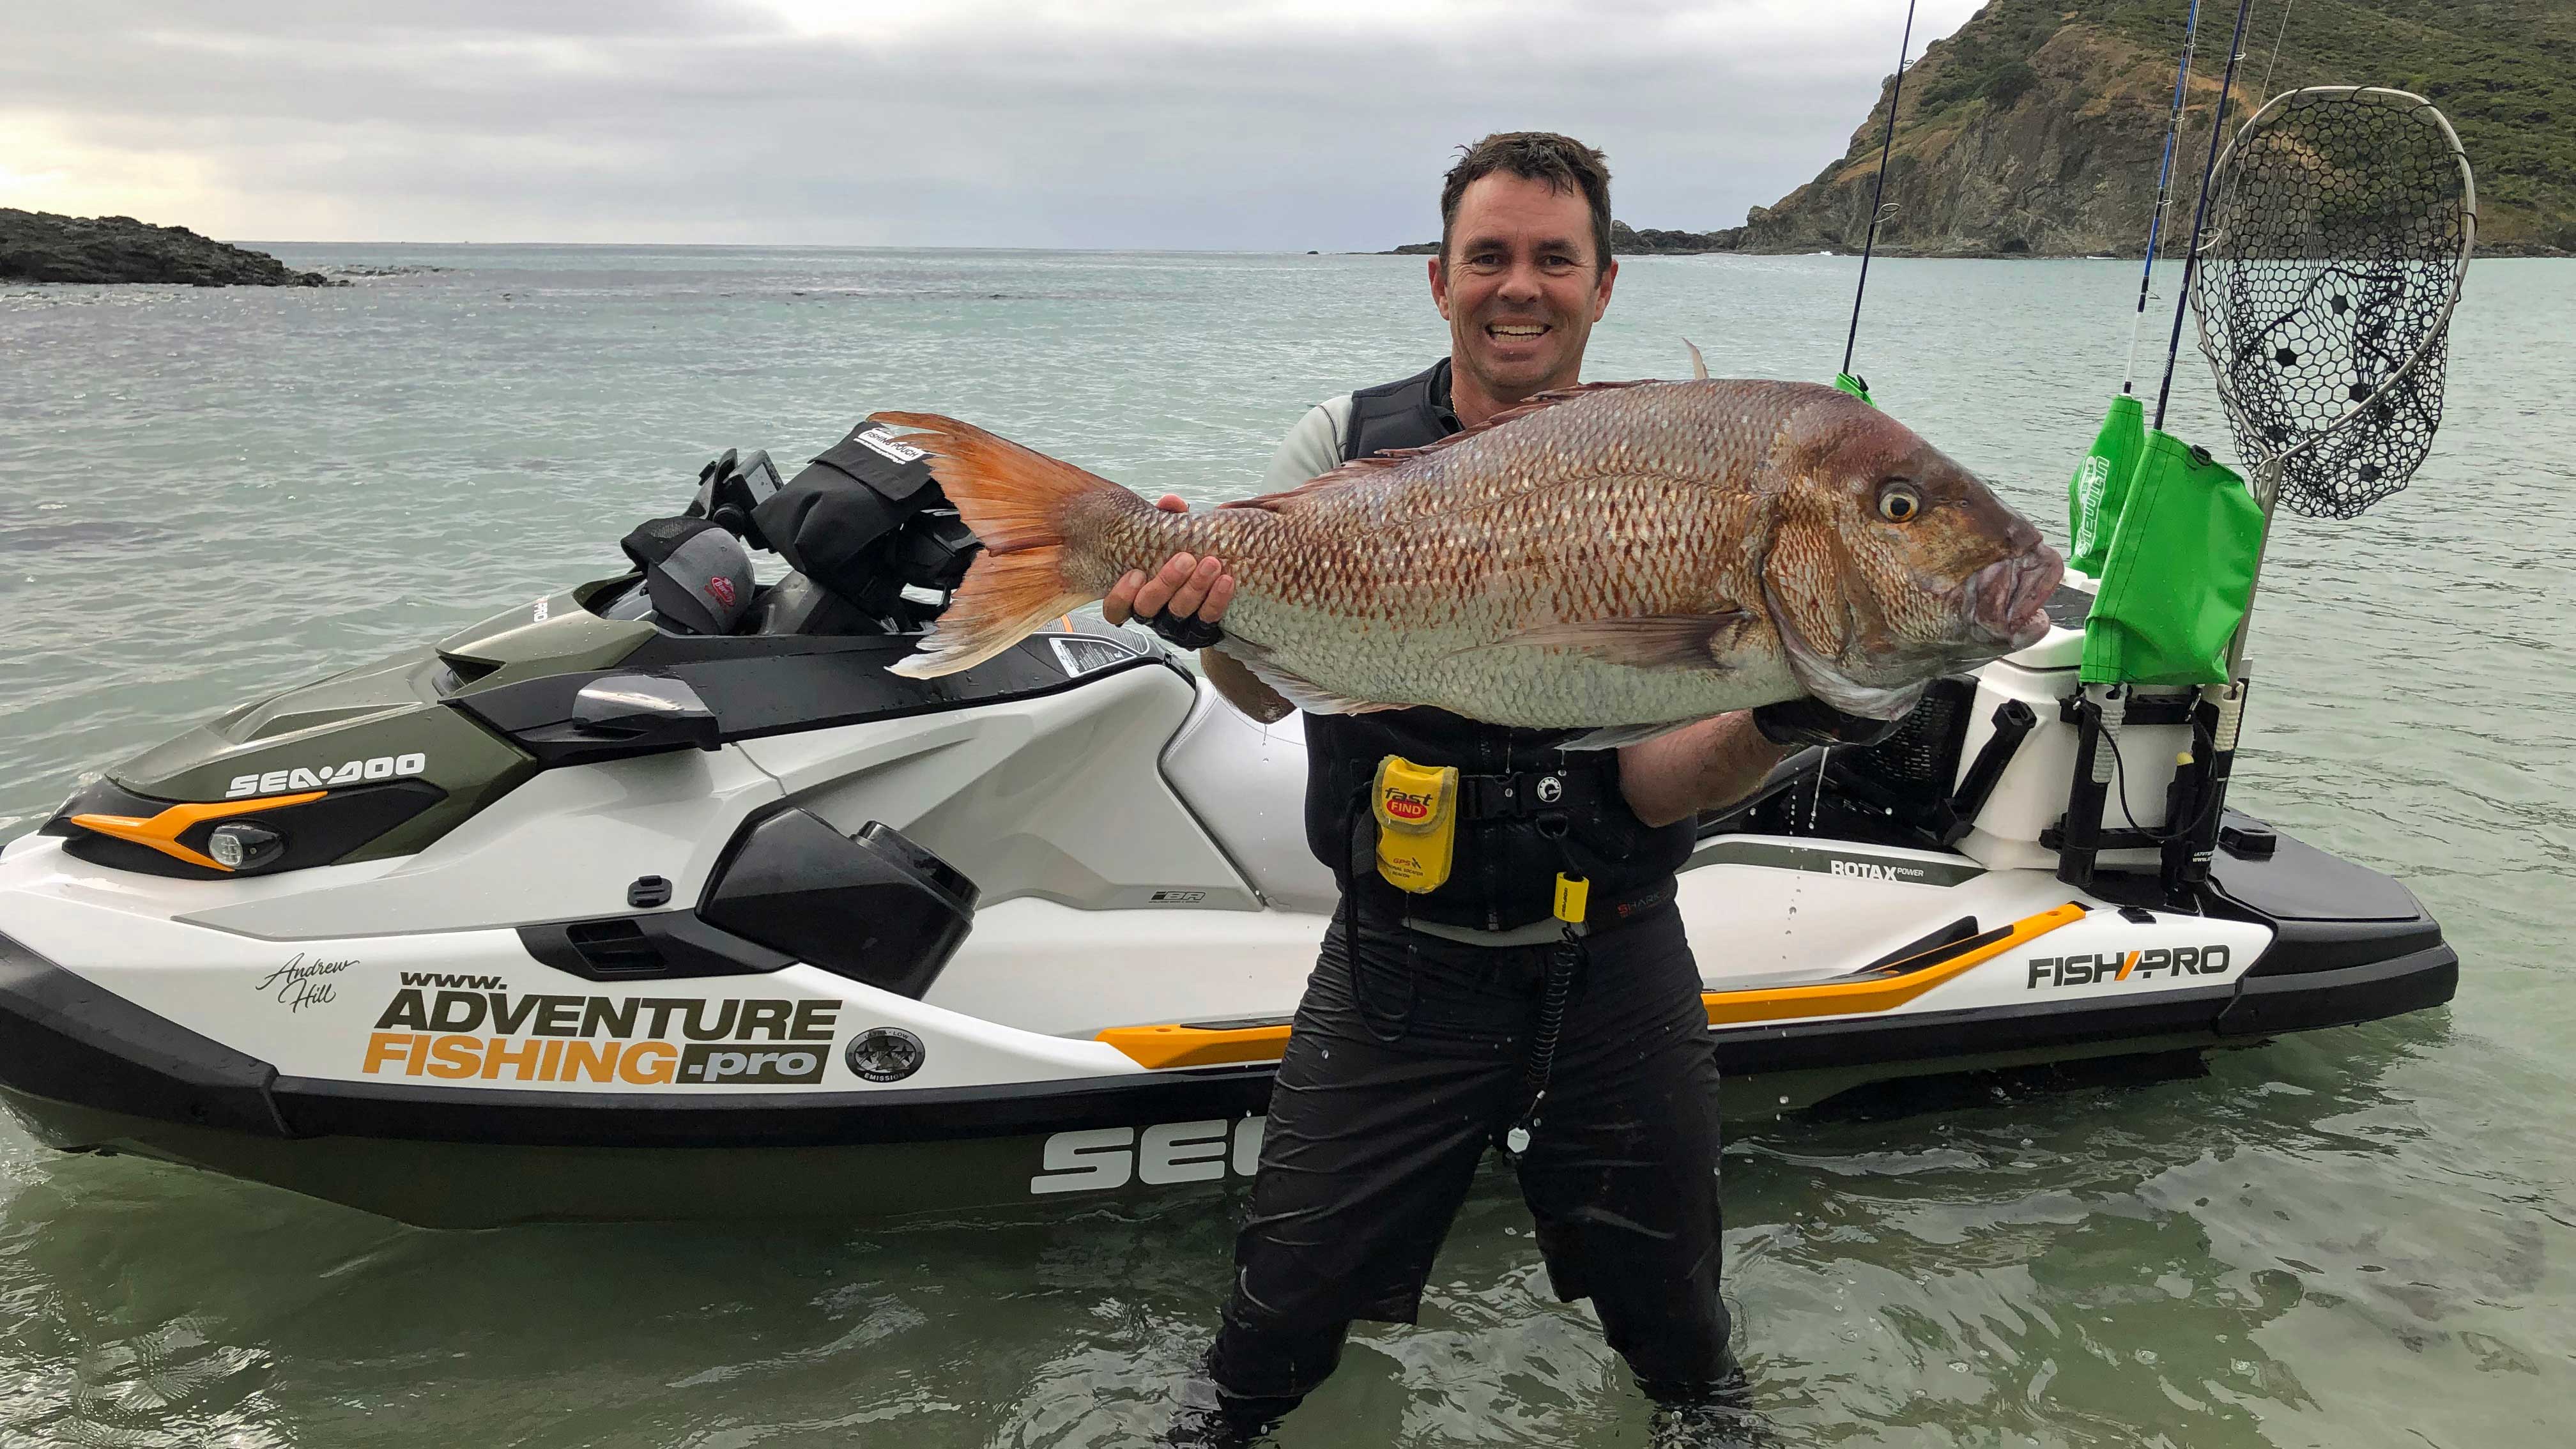 Andrew Hill holding a fish next to his Sea-Doo FishPro